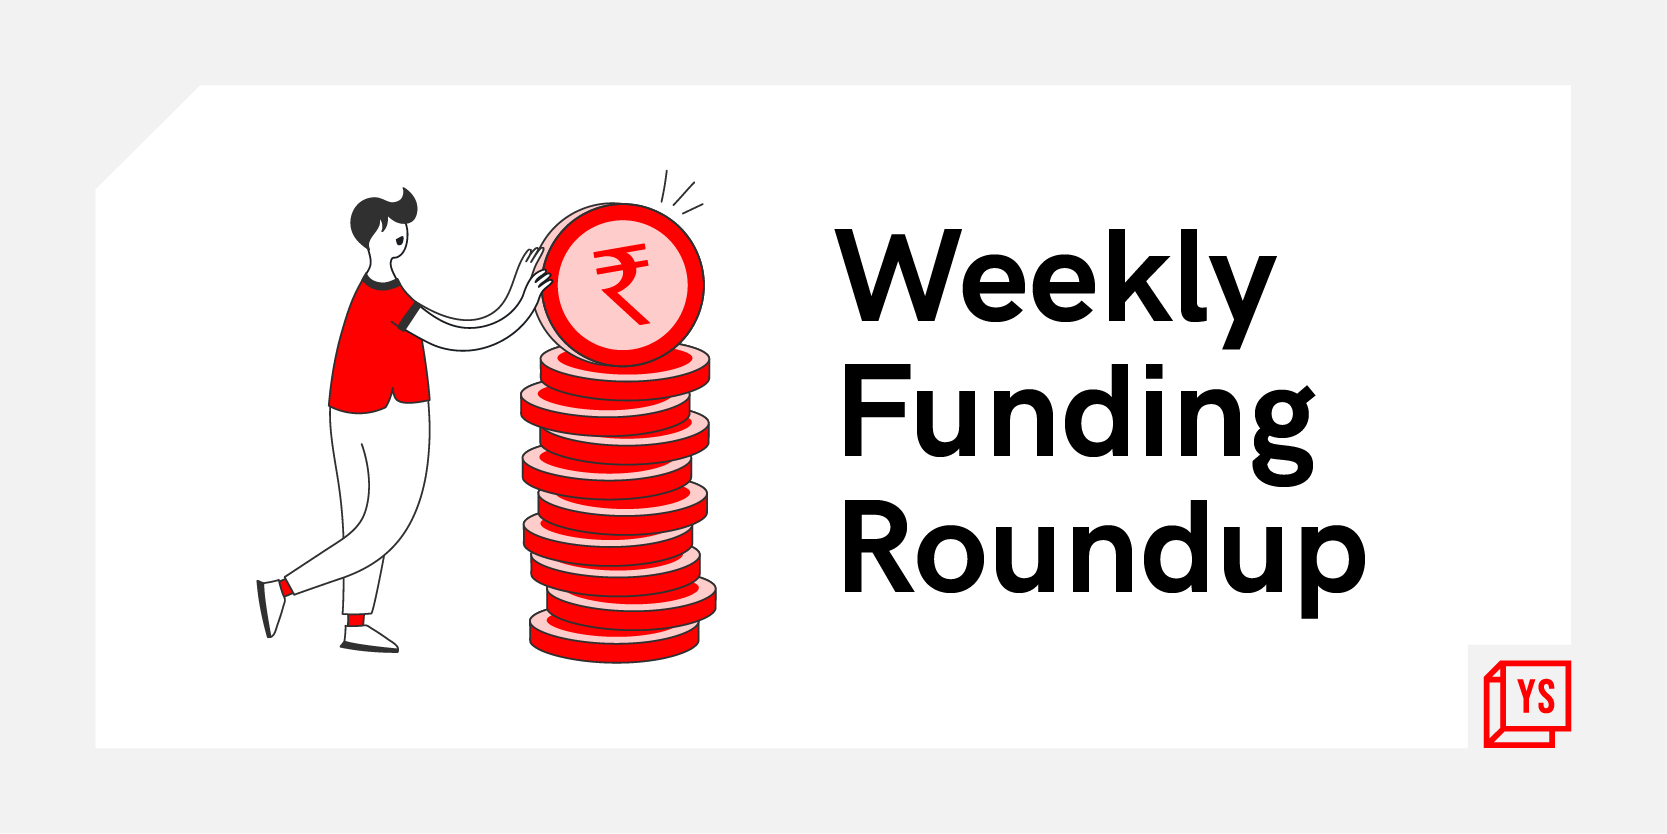 [Weekly funding roundup Dec 13-17] Capital inflow continues to remain strong